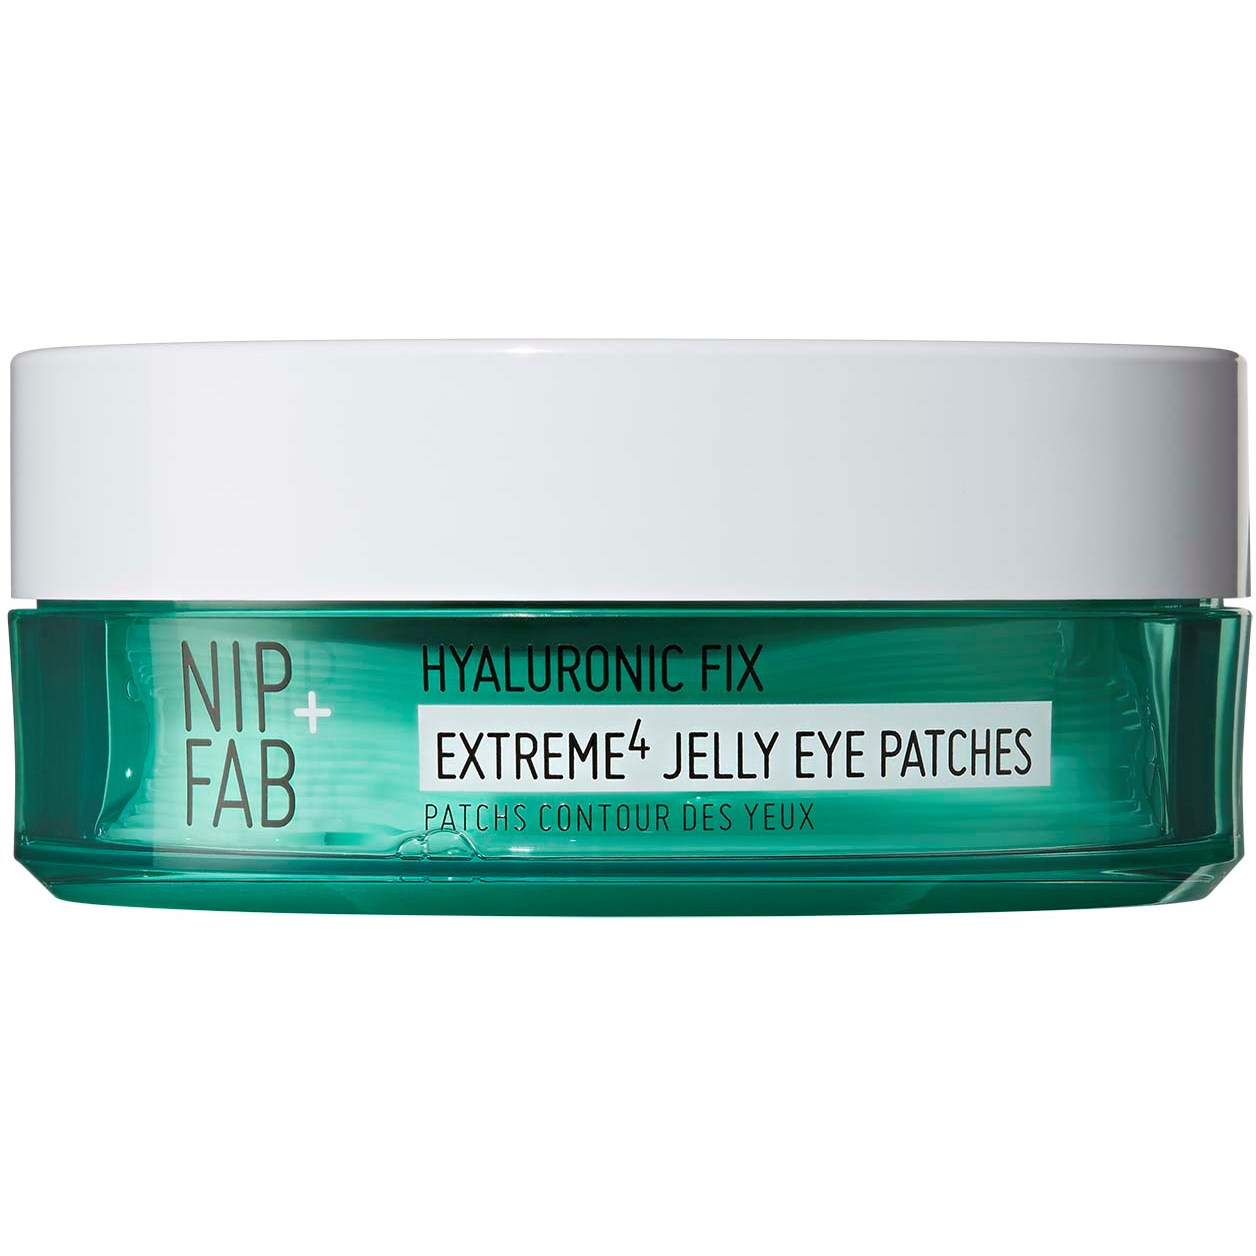 Läs mer om NIP+FAB Hydrate Hyaluronic Fix Extreme4 Jelly Eye Patches